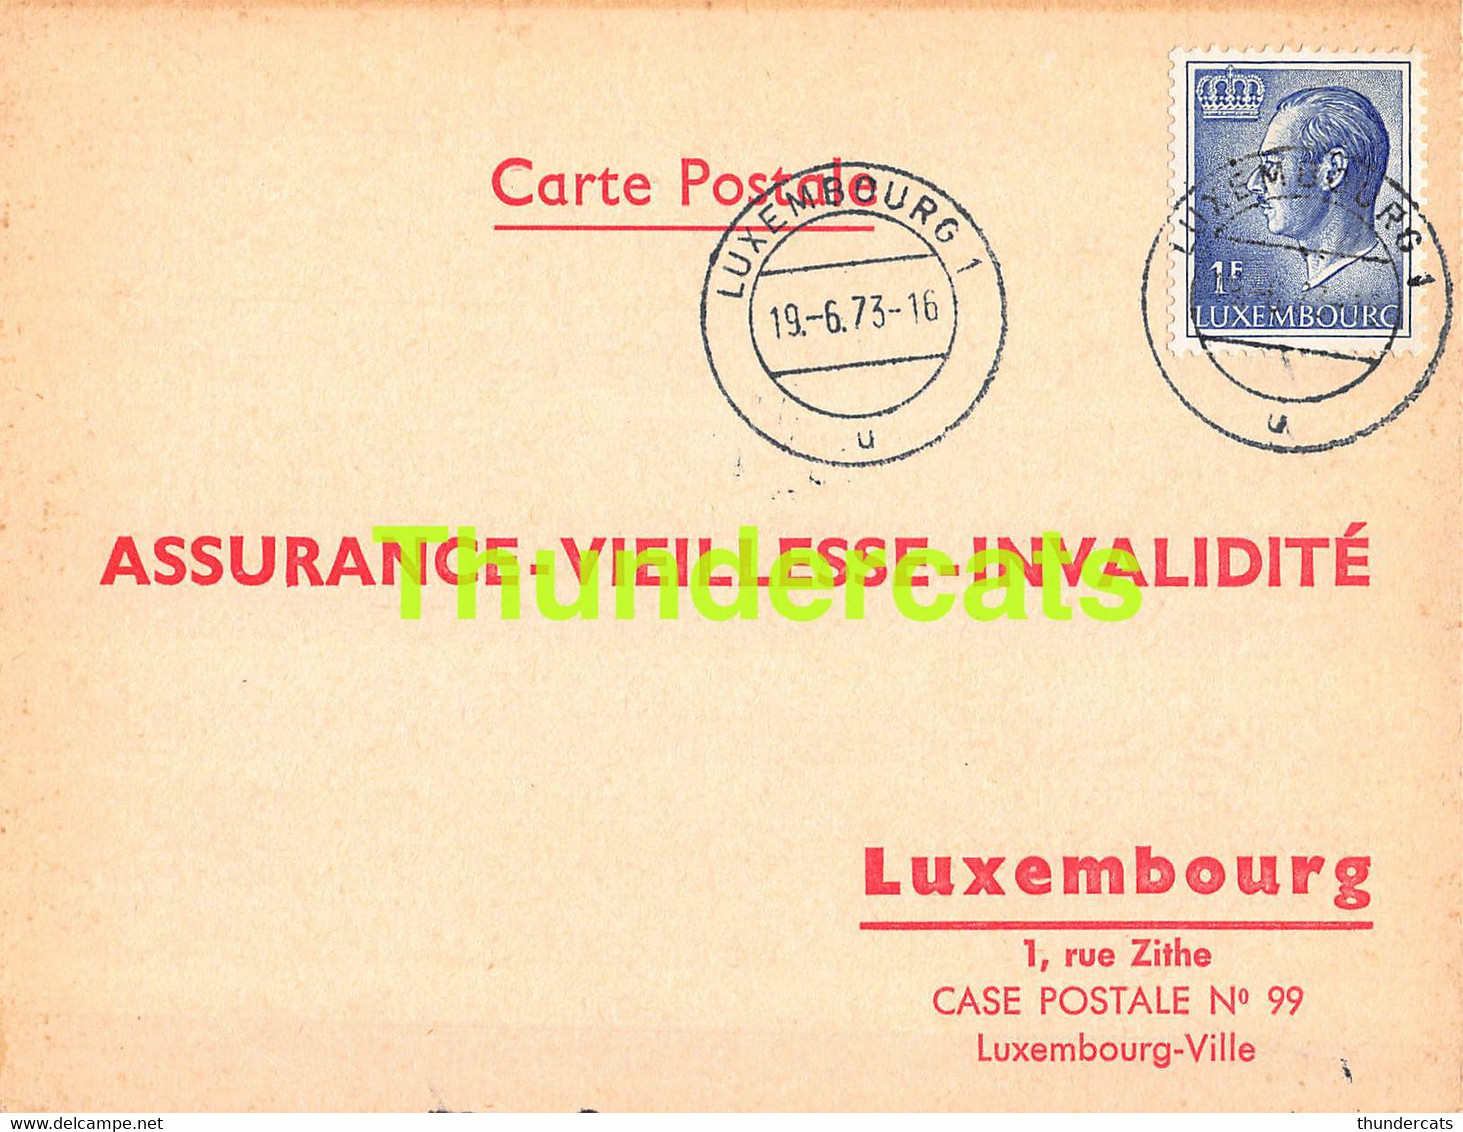 ASSURANCE VIEILLESSE INVALIDITE LUXEMBOURG 1973 ROLLINGER THEVES - Covers & Documents